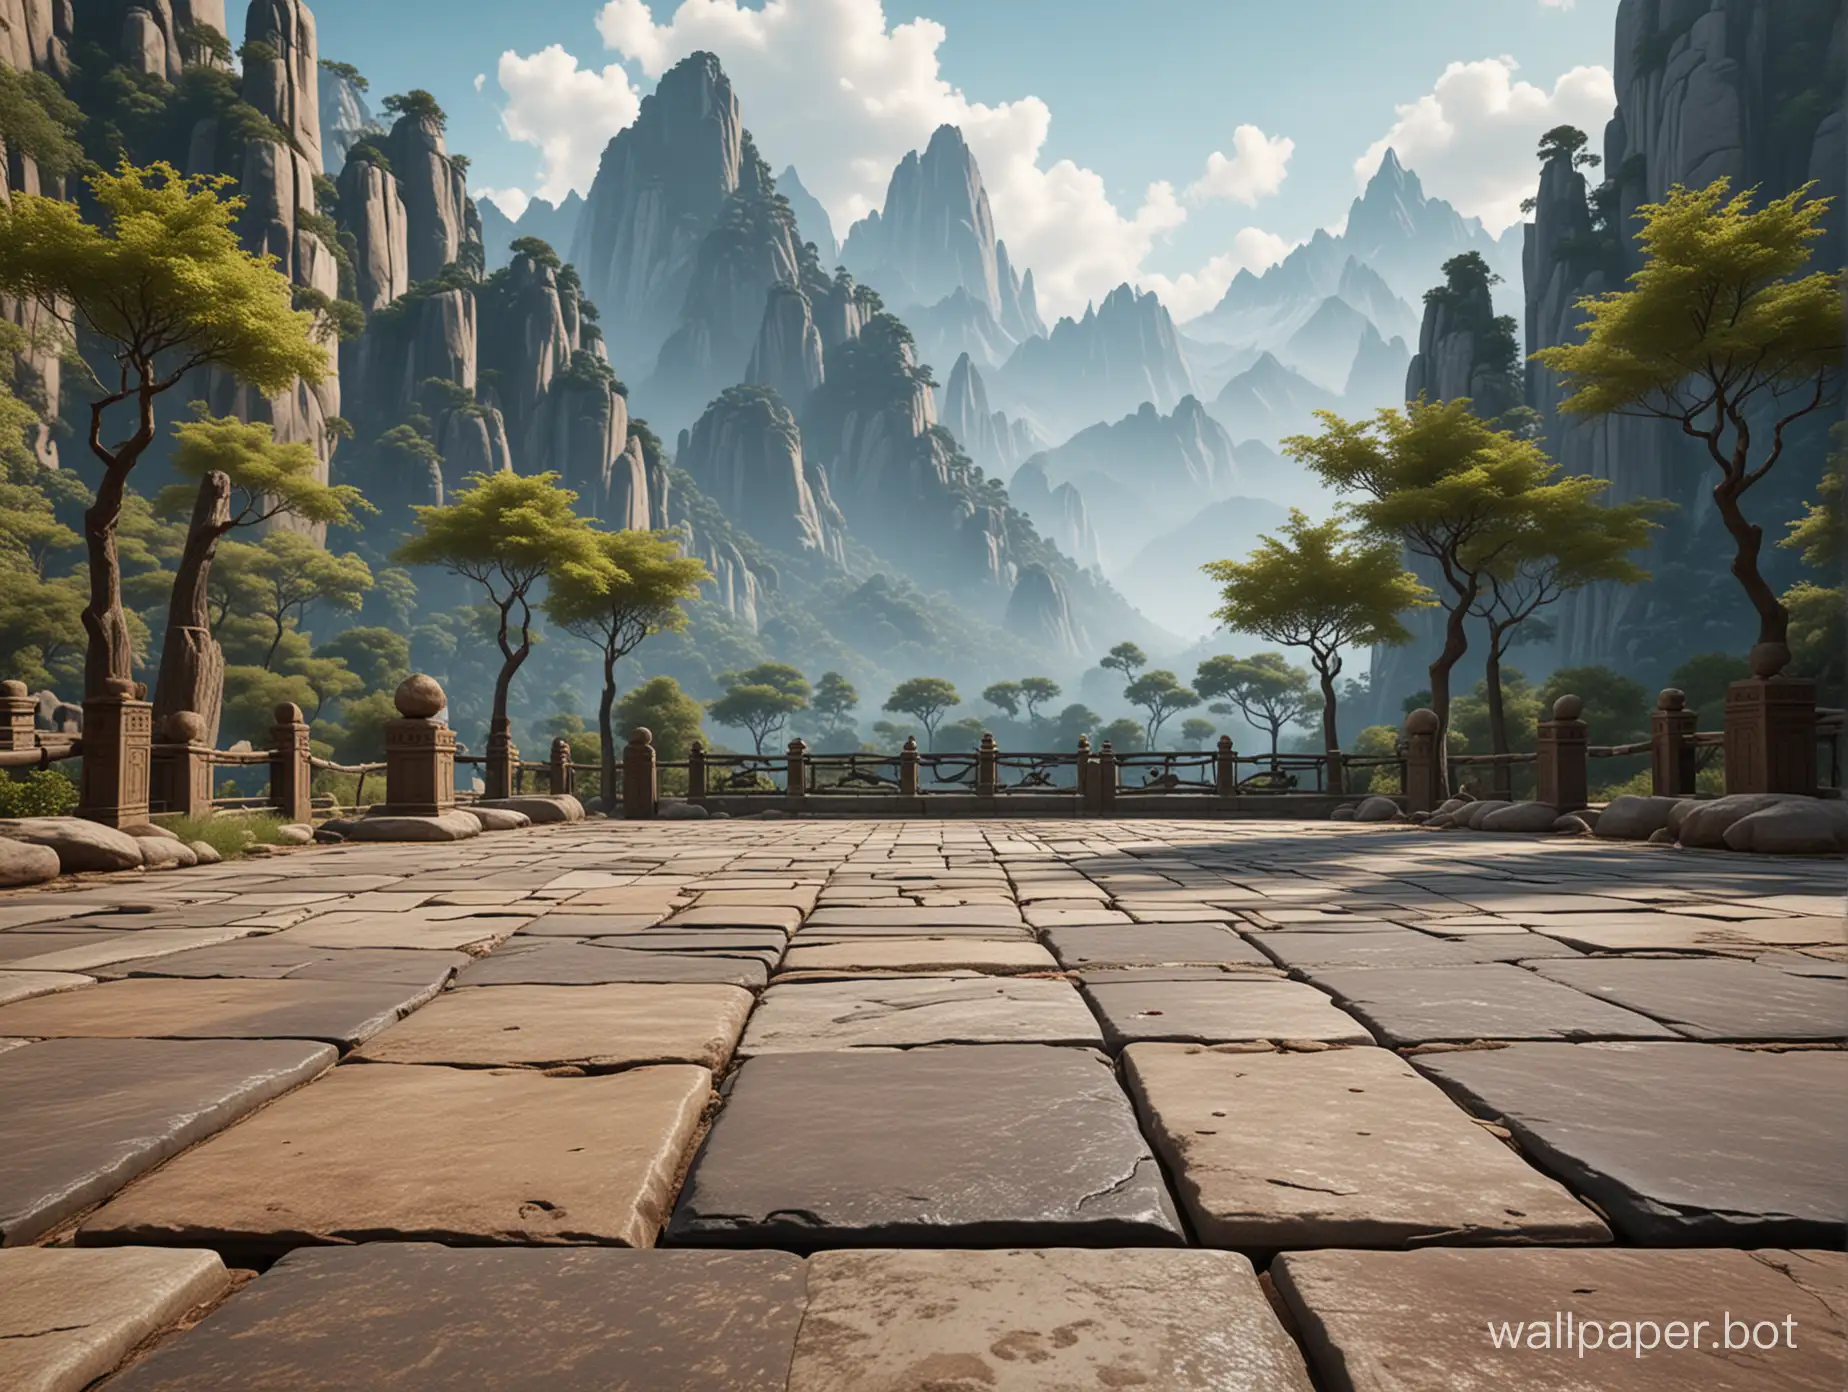 Kung-Fu-Movie-Landscape-Majestic-Mountains-and-Stone-Floor-in-Realistic-Disney-Style